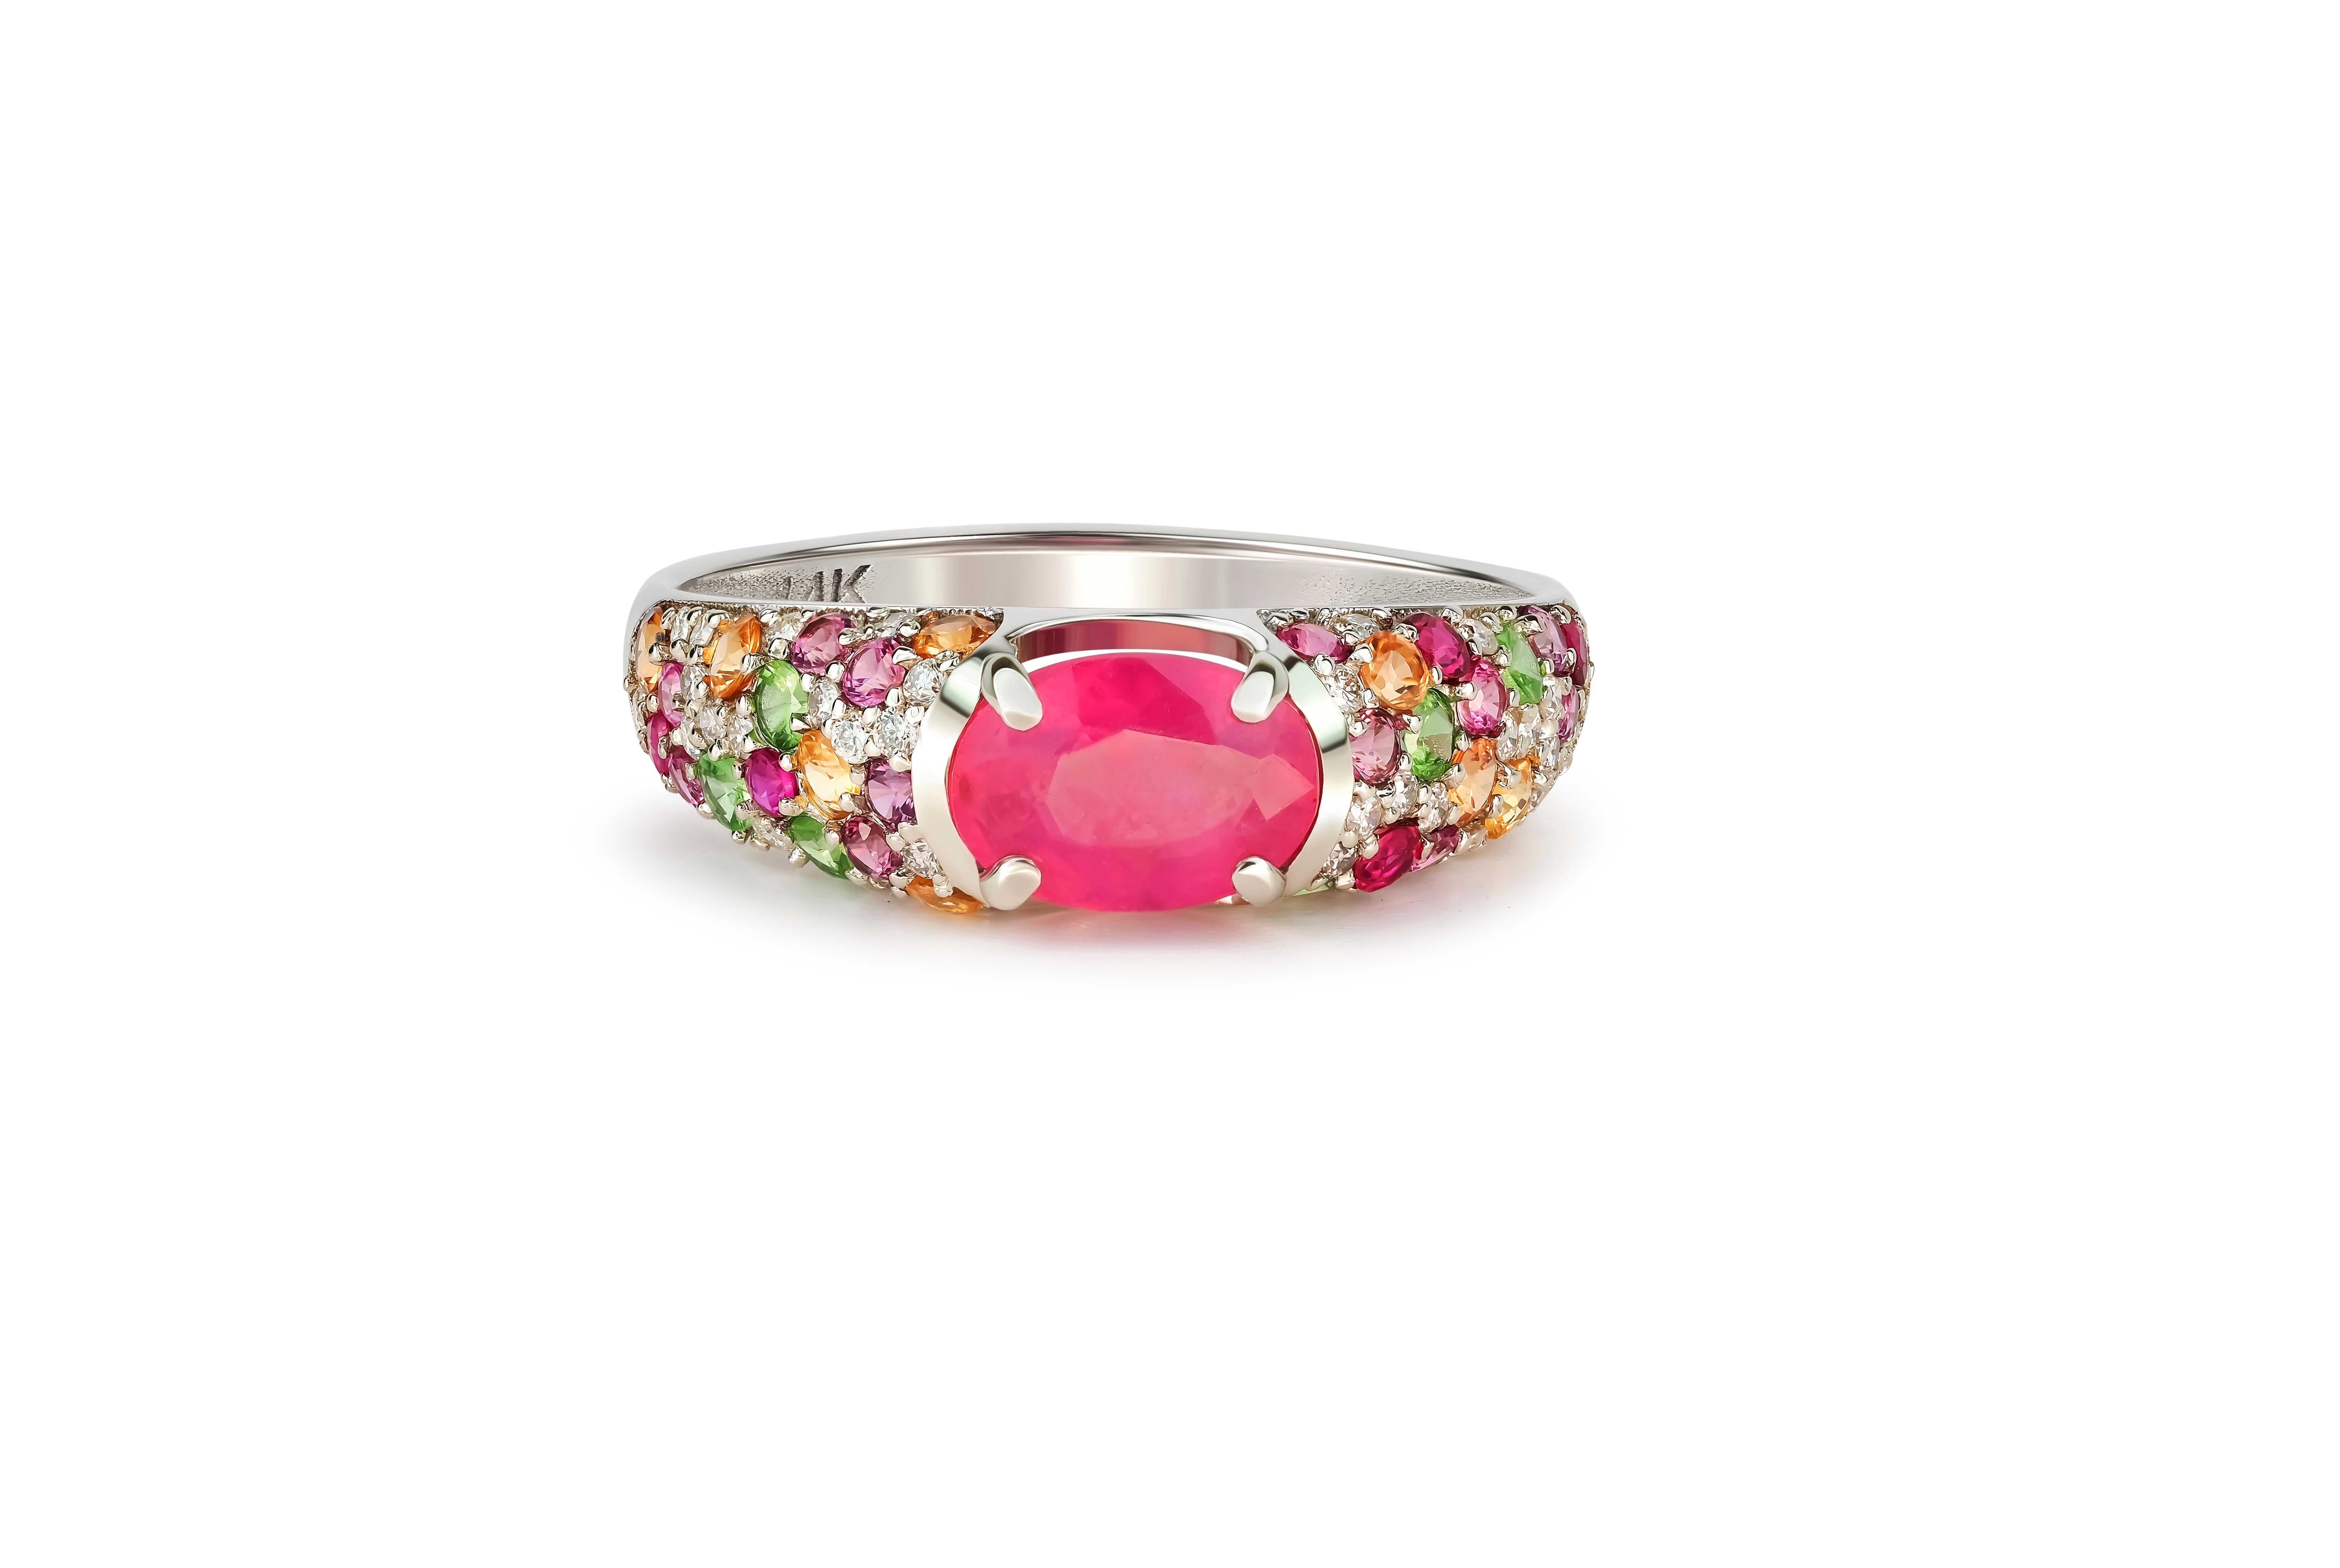 14k gold ruby and multicolored gemstones ring.
14k white gold
Total weight: 2 gr depends from size

Ruby
color: pink to red depends from light
clarity: transparent
cut: oval
weight: 1.2 ct

Other gemstones:

Sapphires and tsavorites: yellow, green